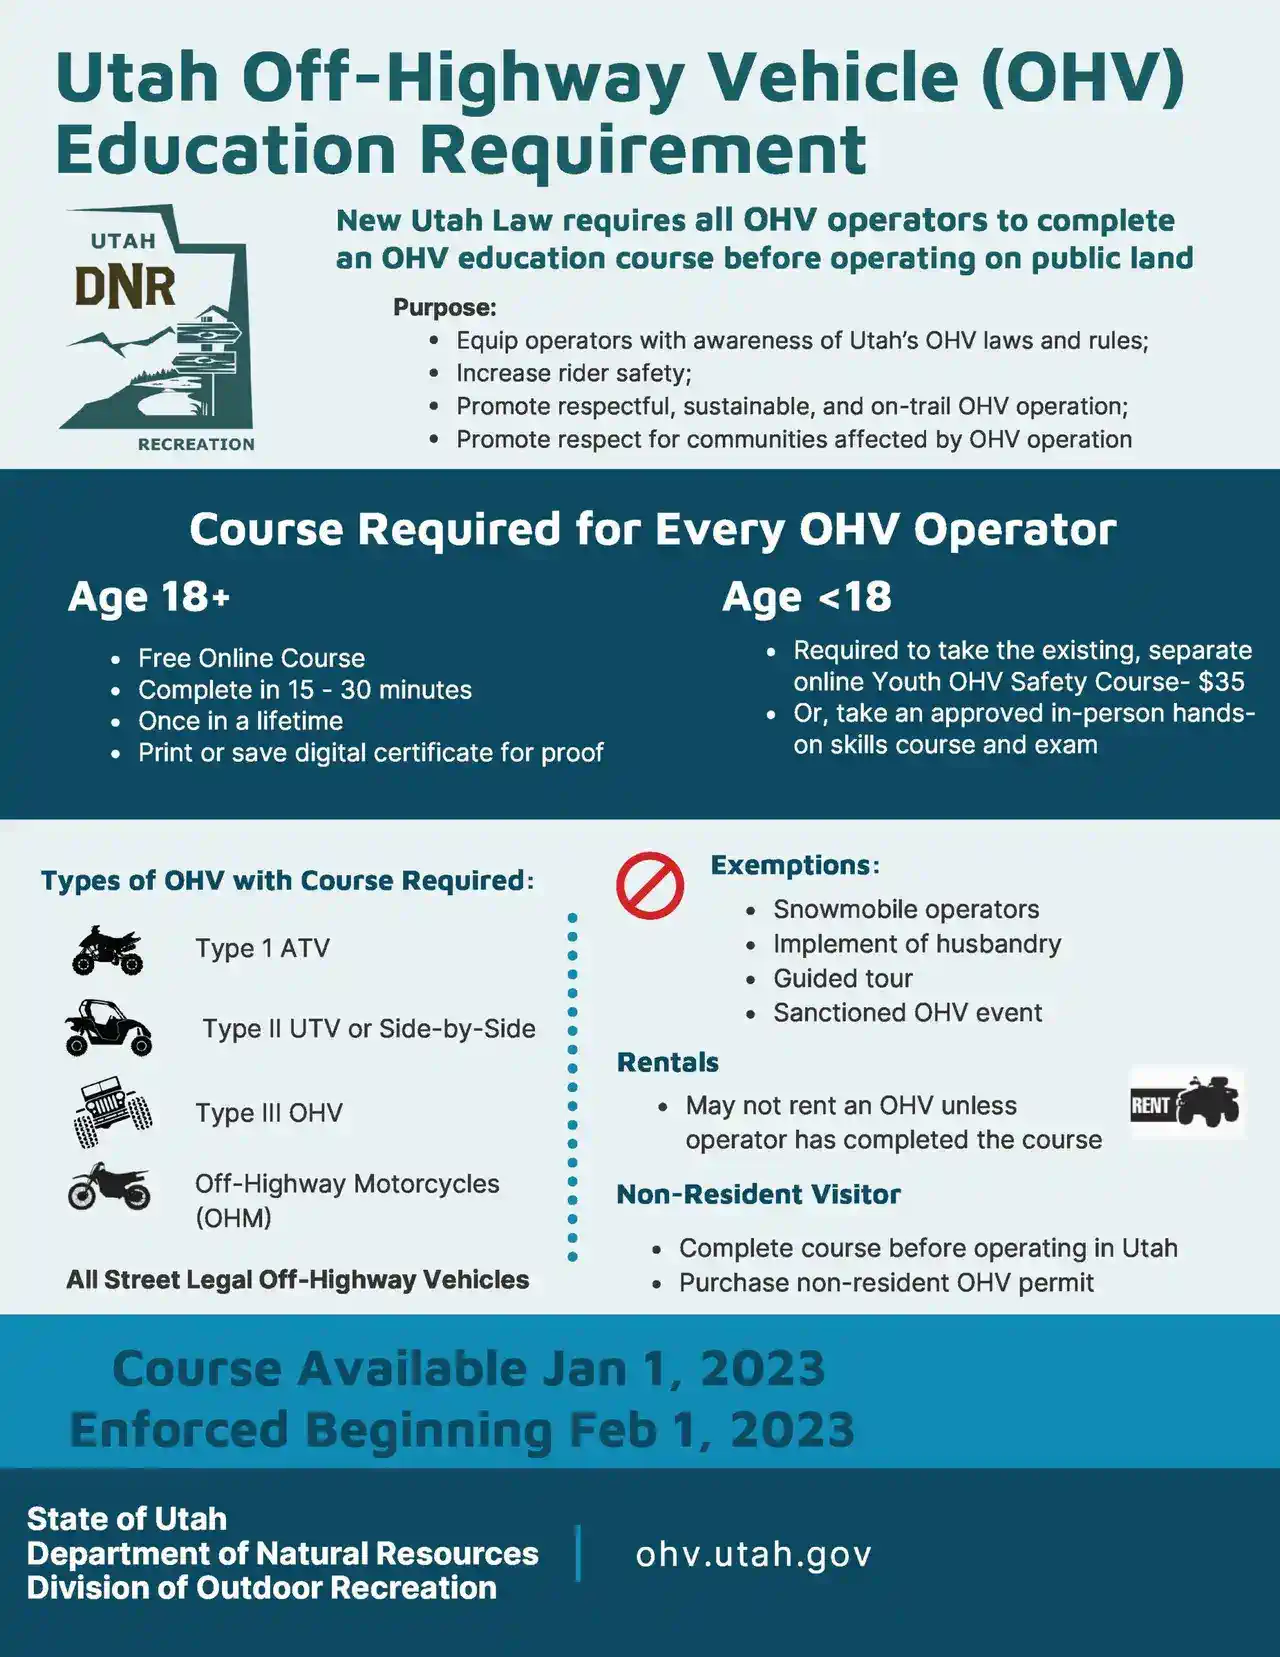 Off-Highway Vehicle Education Course